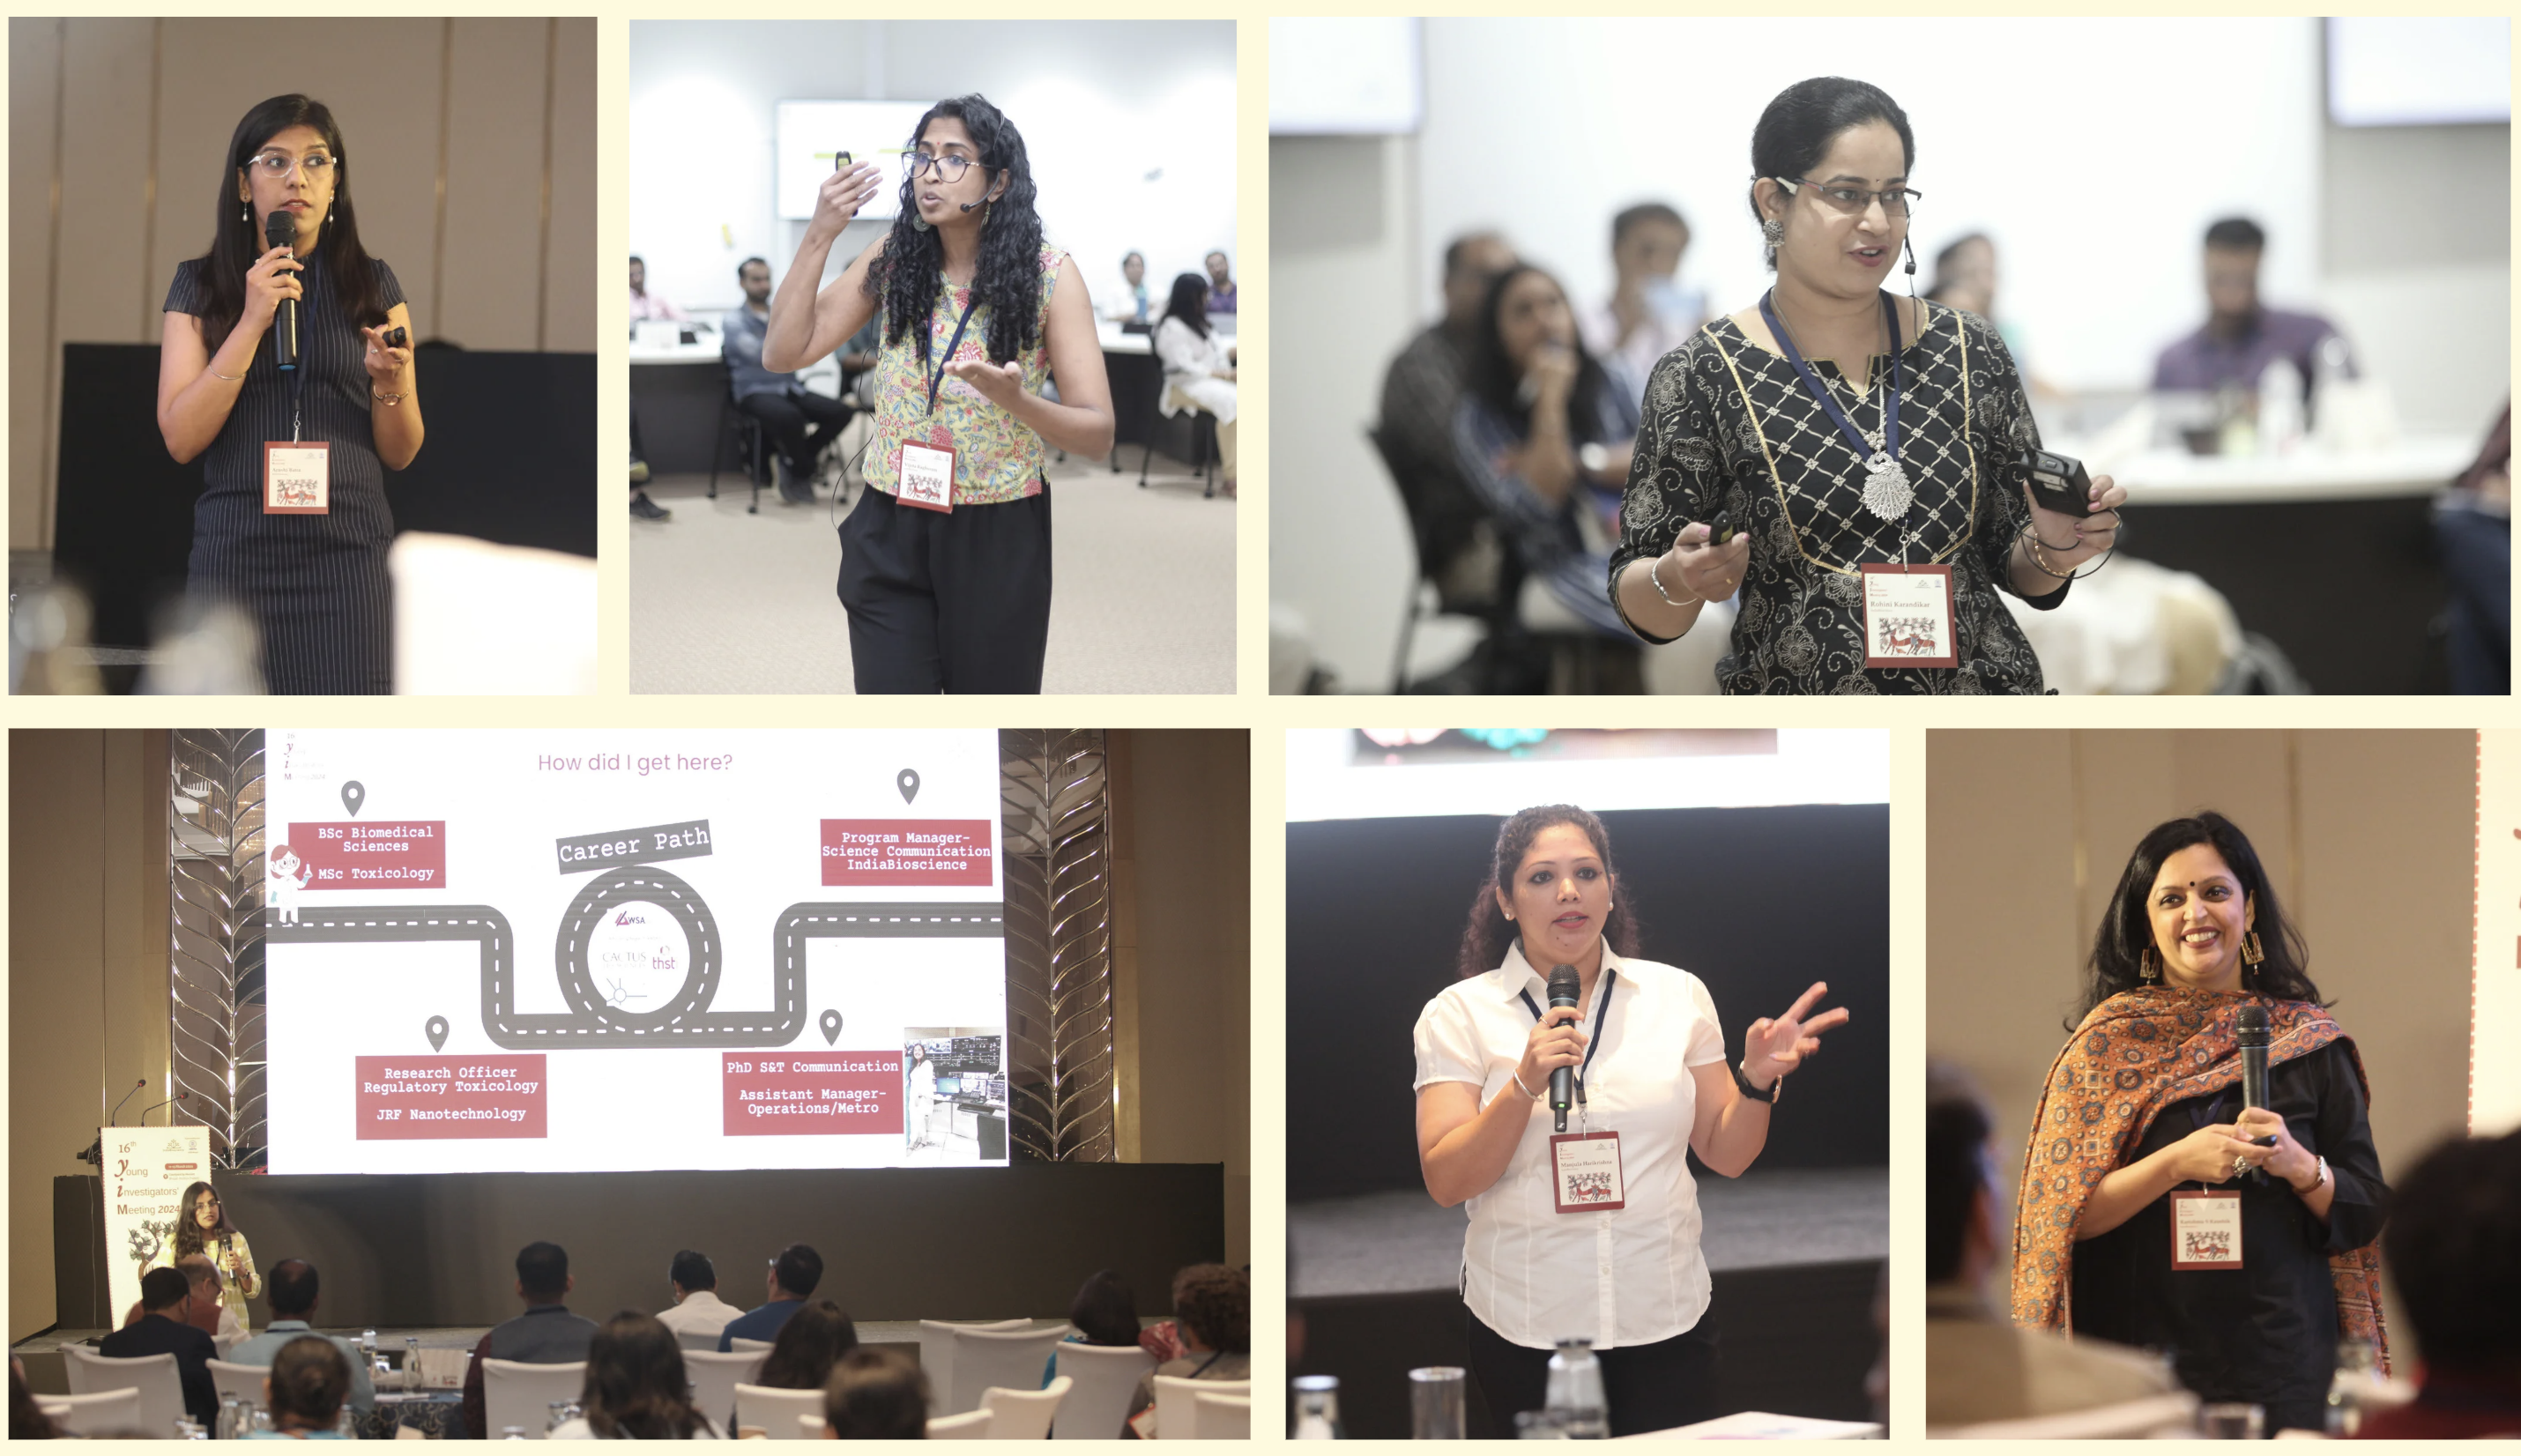 Glimpse from talks by the IndiaBioscience team. Photo credits: IndiaBioscience, collage by Ankita Rathore